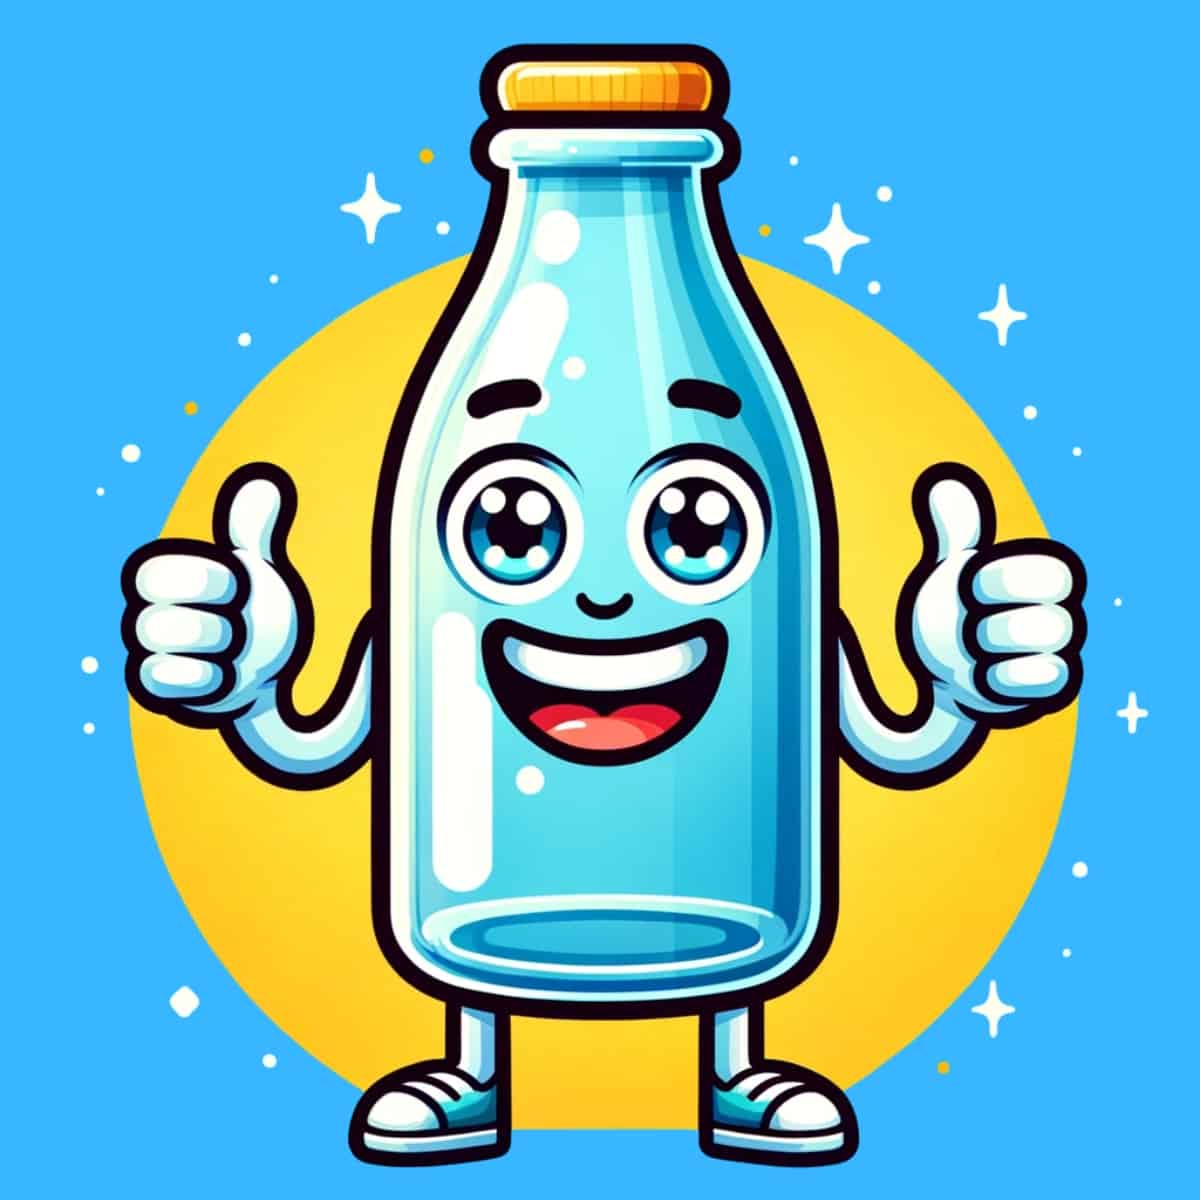 A cartoon graphic of a blue bottle smiling and doing the thumbs-up sign with both hands on a blue background.